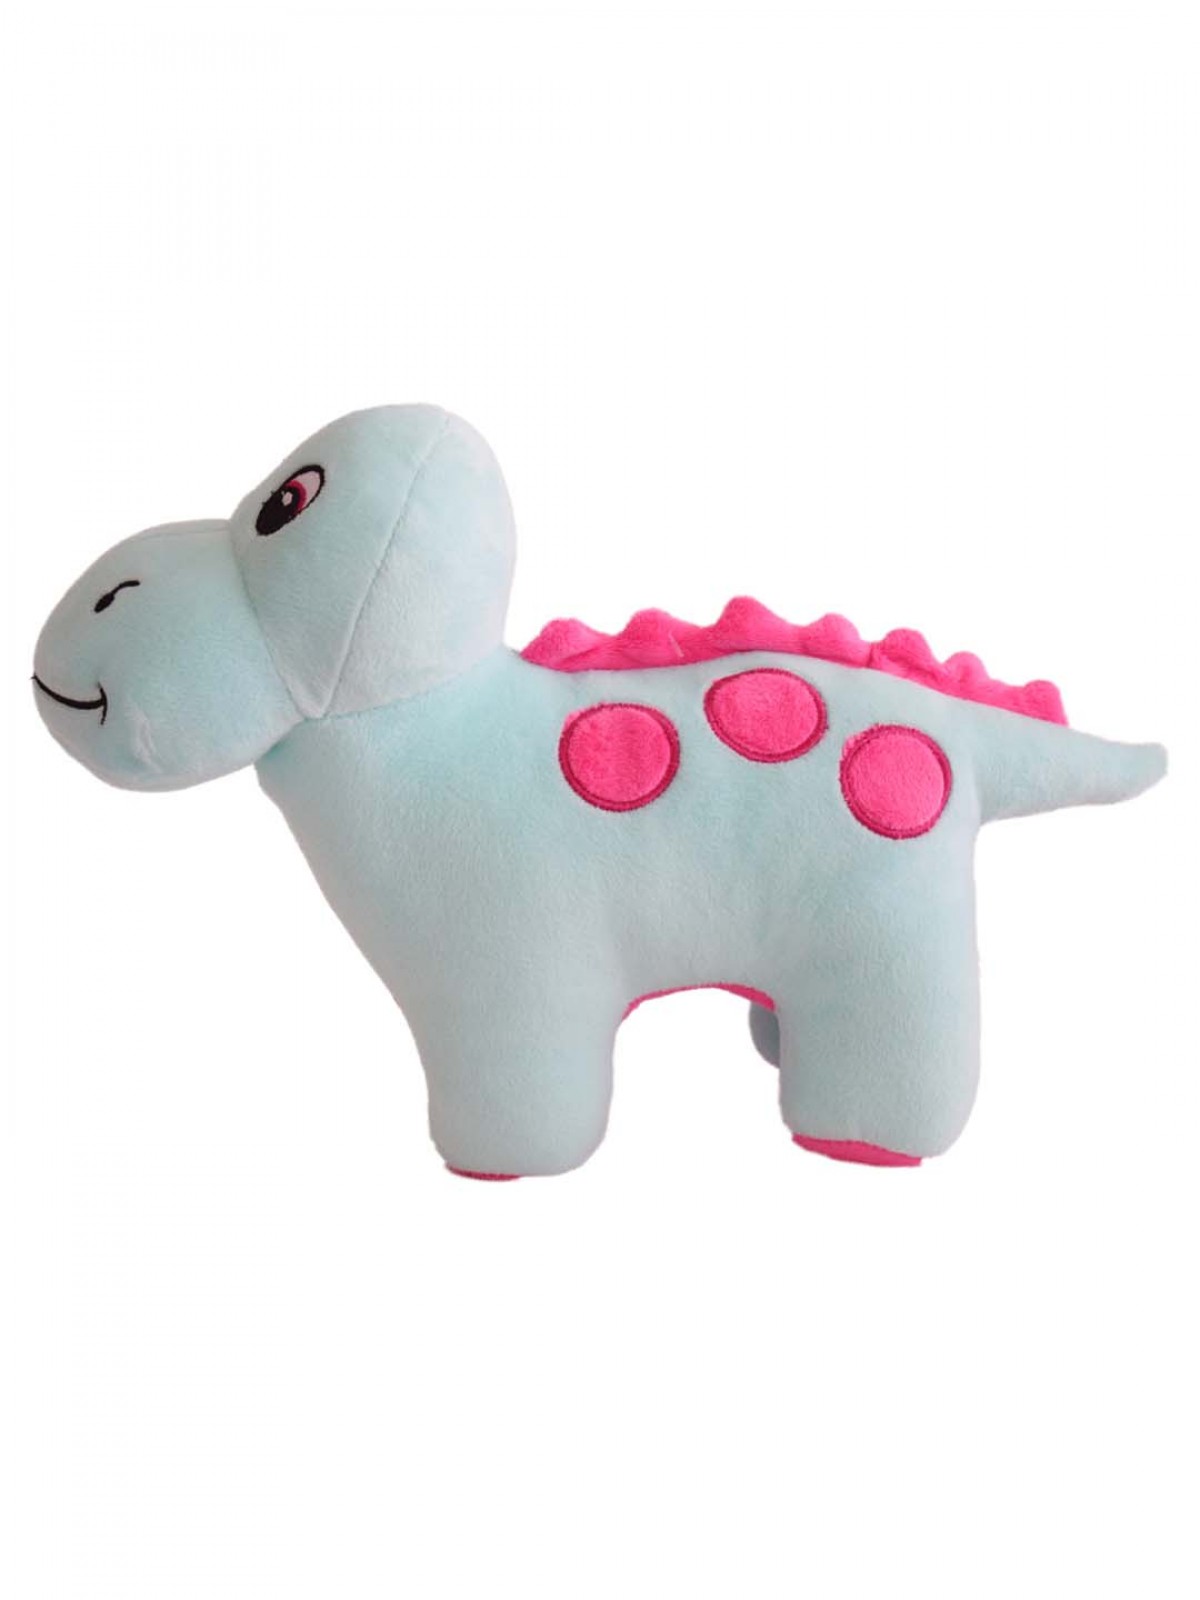 Adorable Stuffed Plush Dinosaur By Mirada, Soft Toys For Kids Of All Ages, 3Y+, Blue, 30Cm